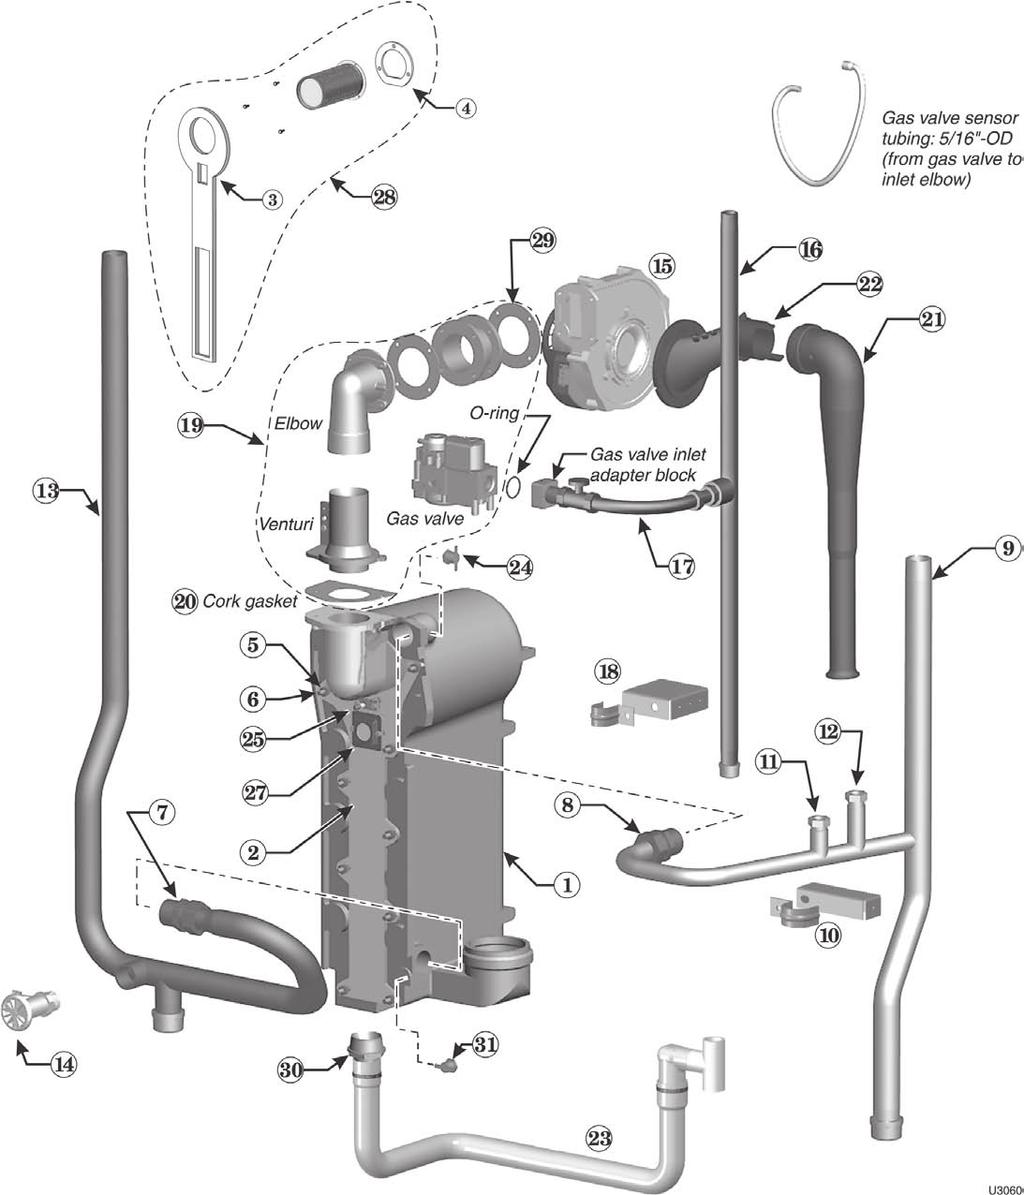 Figure 121 Heat exchanger and piping Ultra-80 and